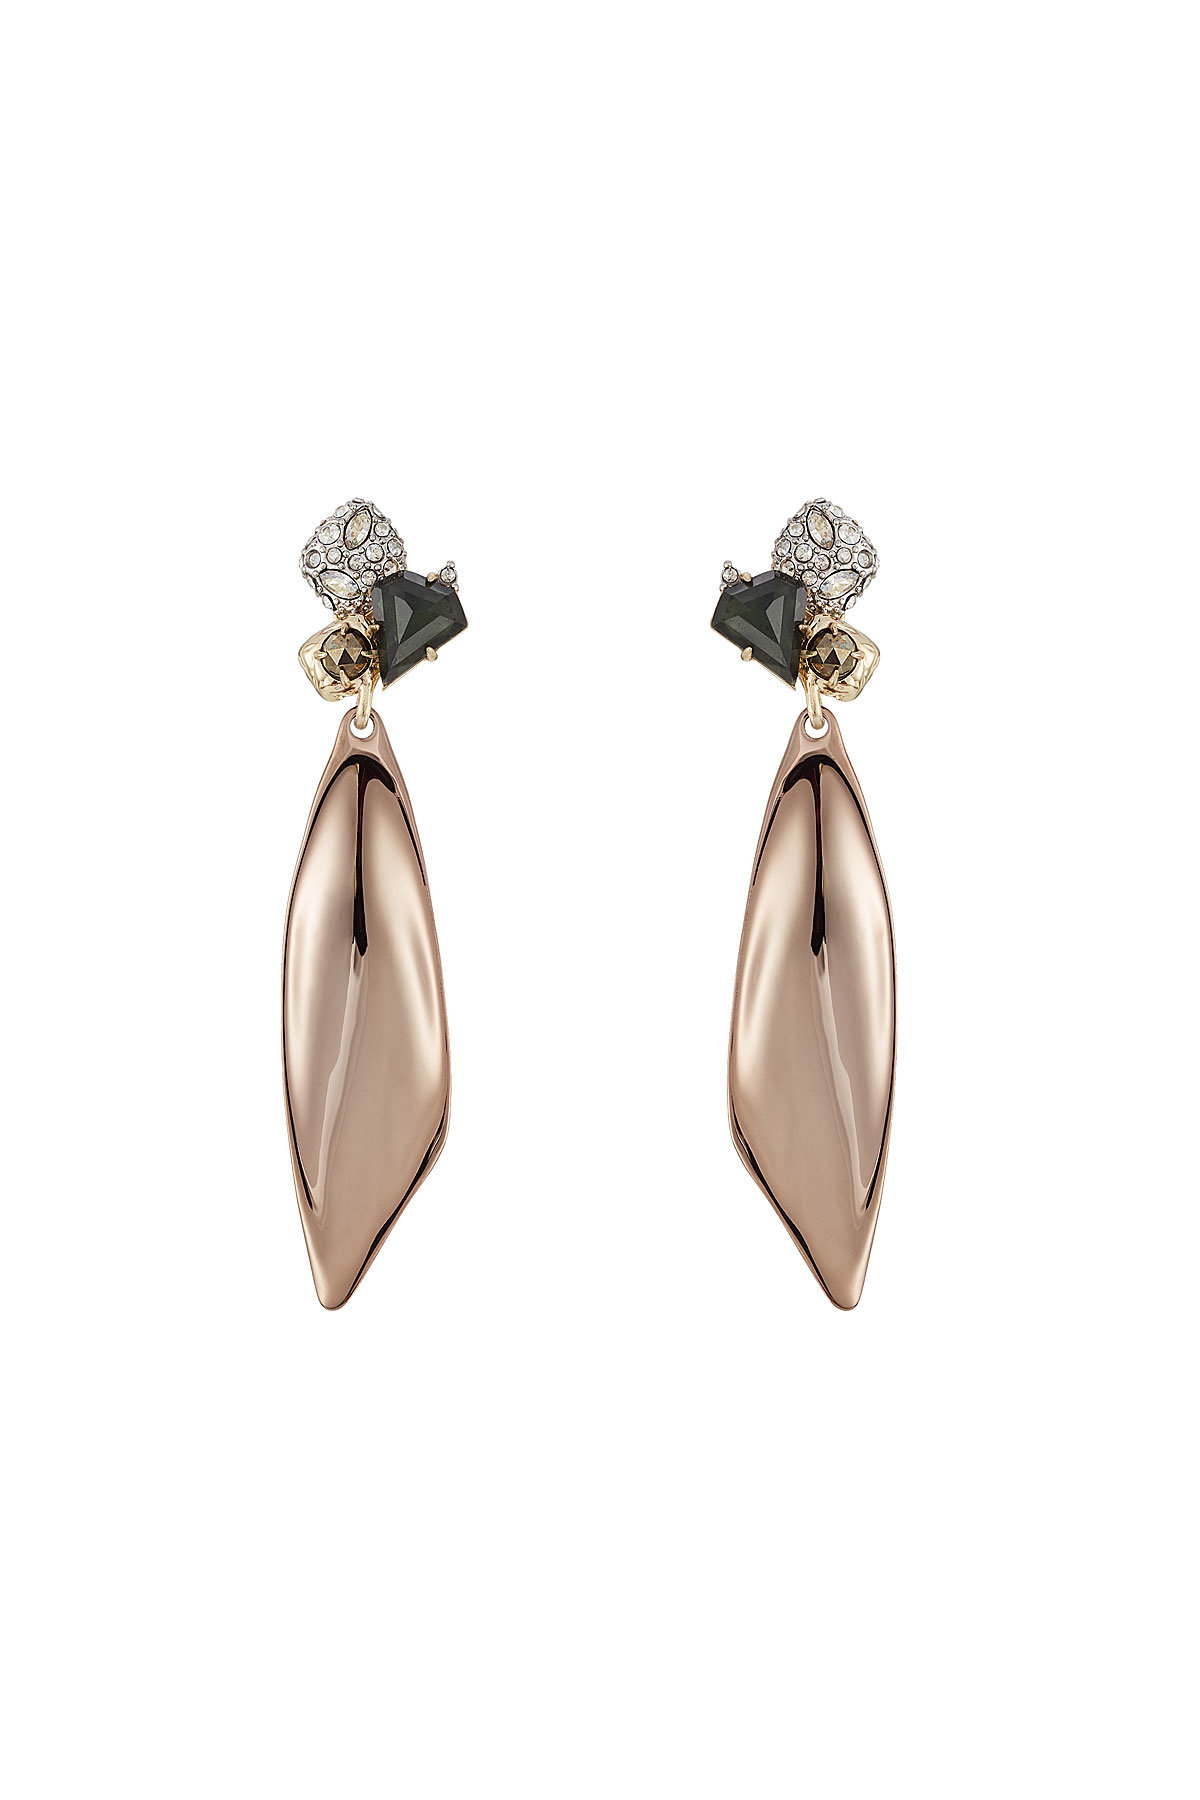 10kt Gold Earrings with Crystals by Alexis Bittar